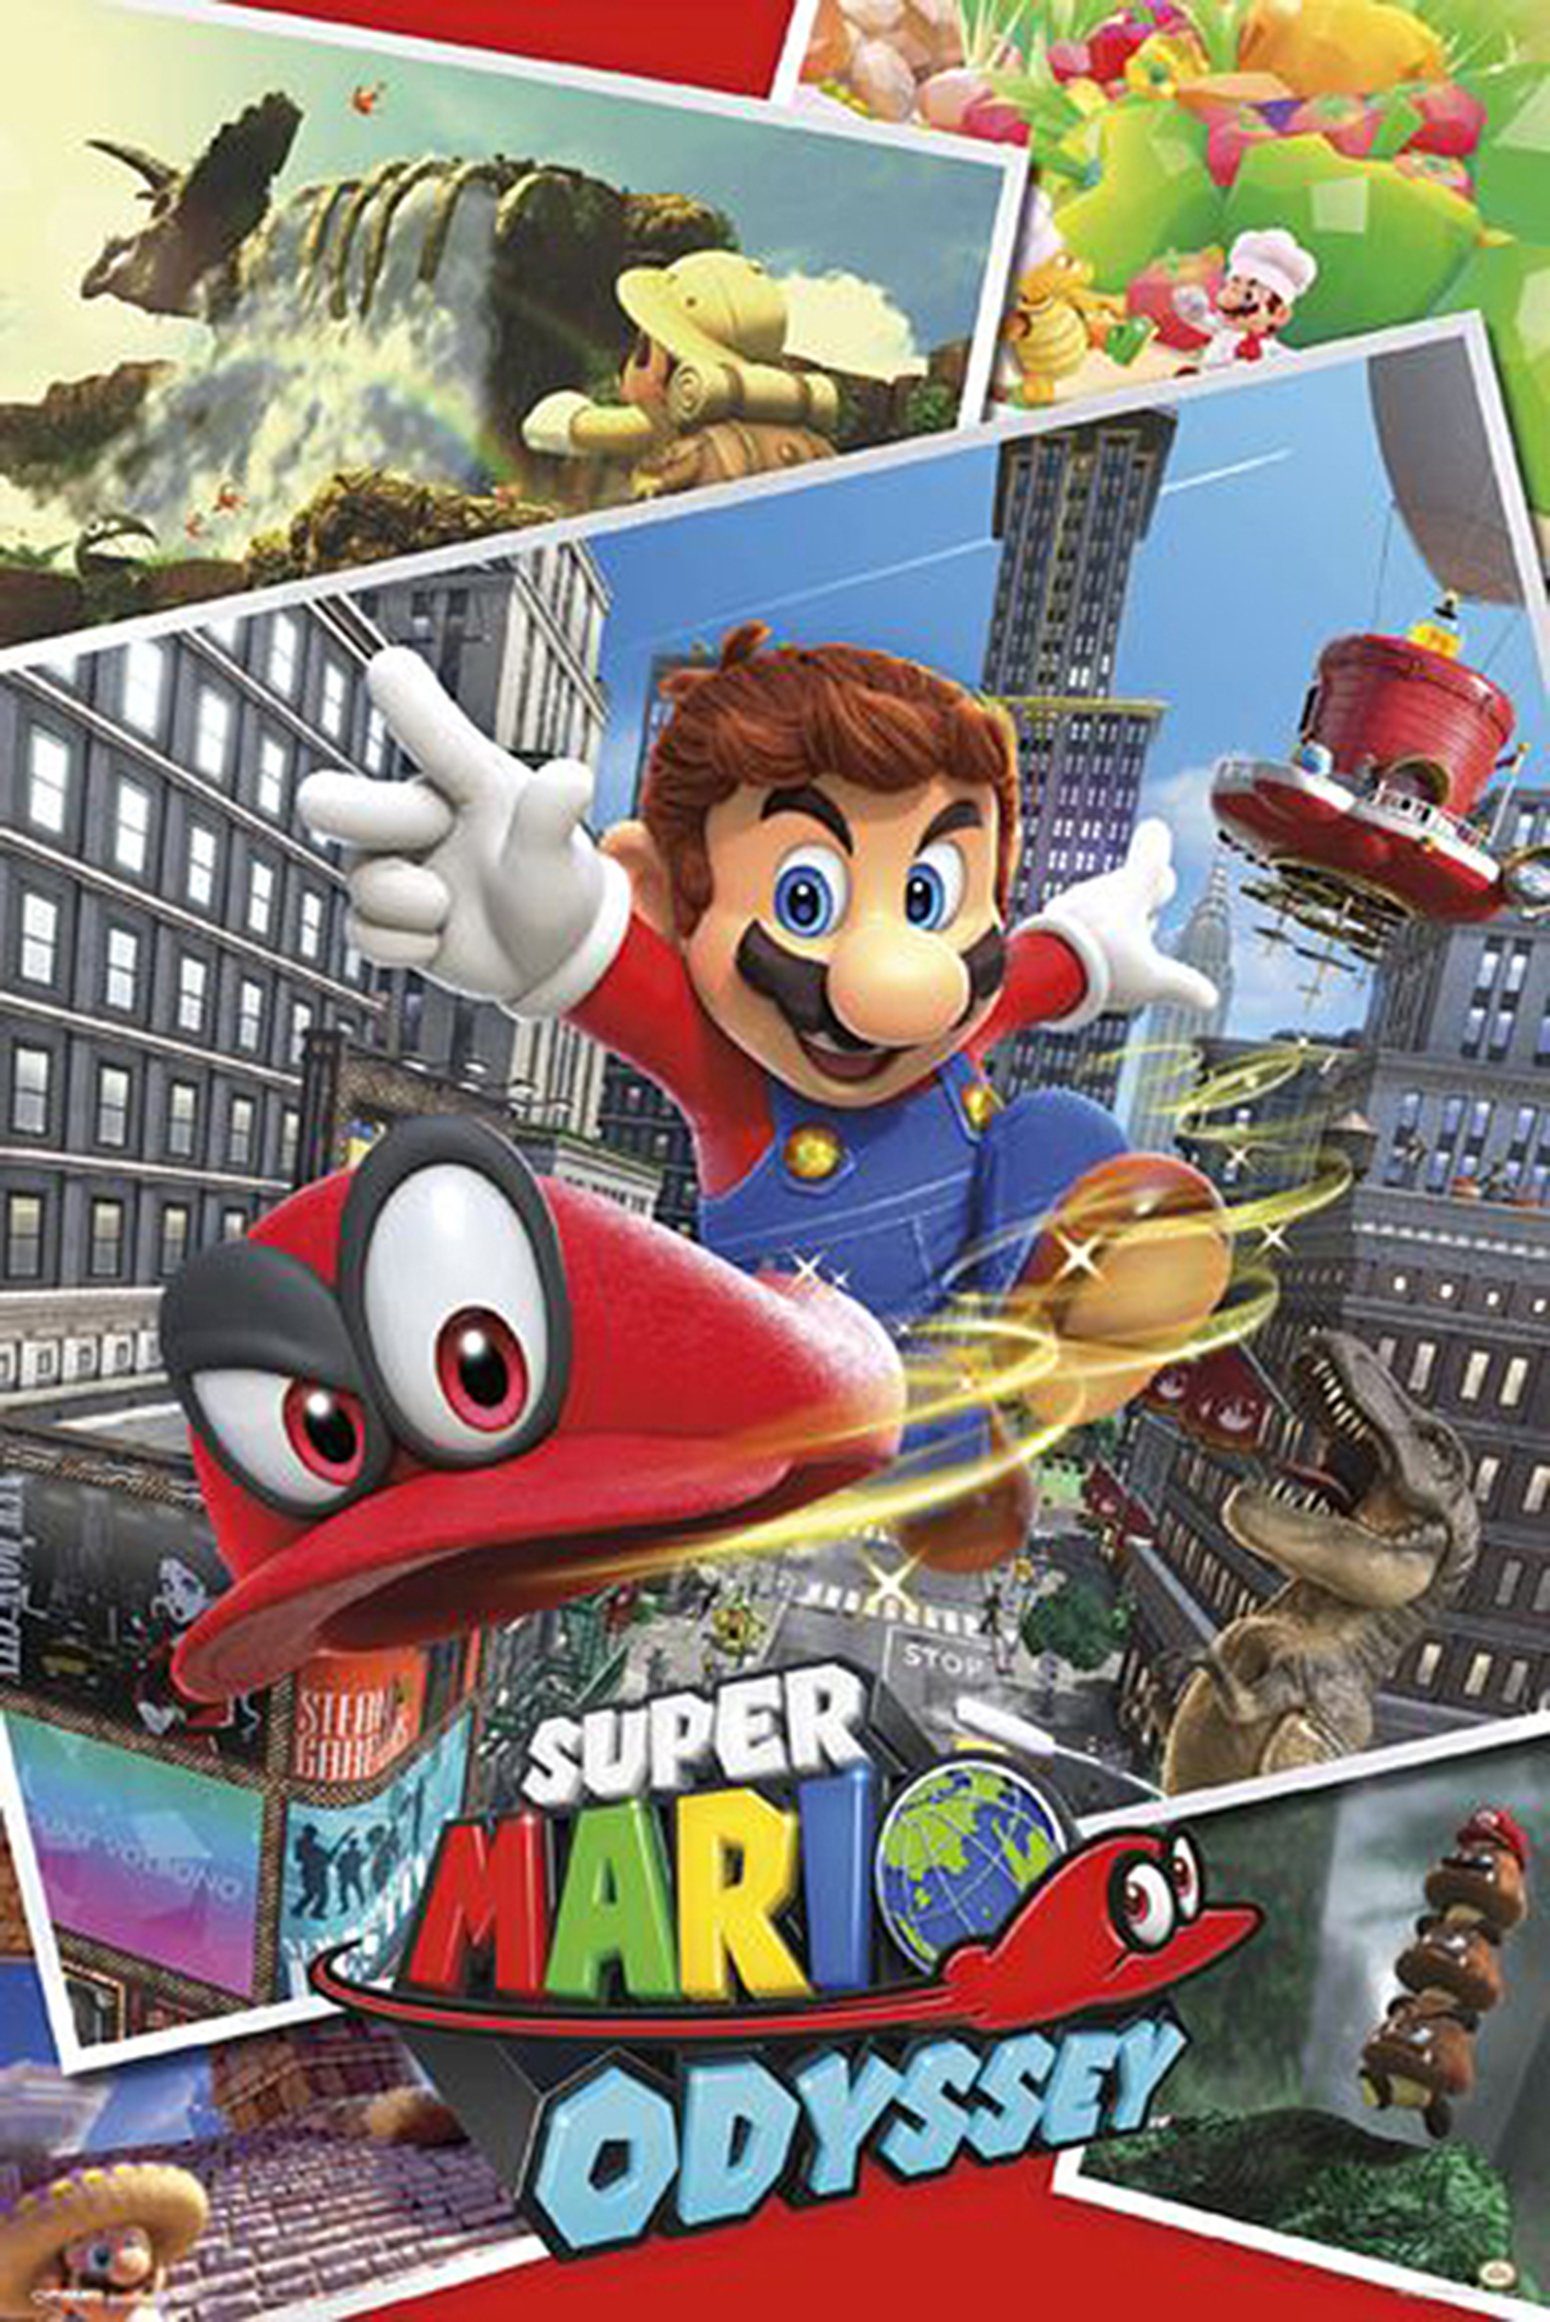 PYRAMID Poster Super Mario Poster Odyssey Collage 61 x 91,5 cm